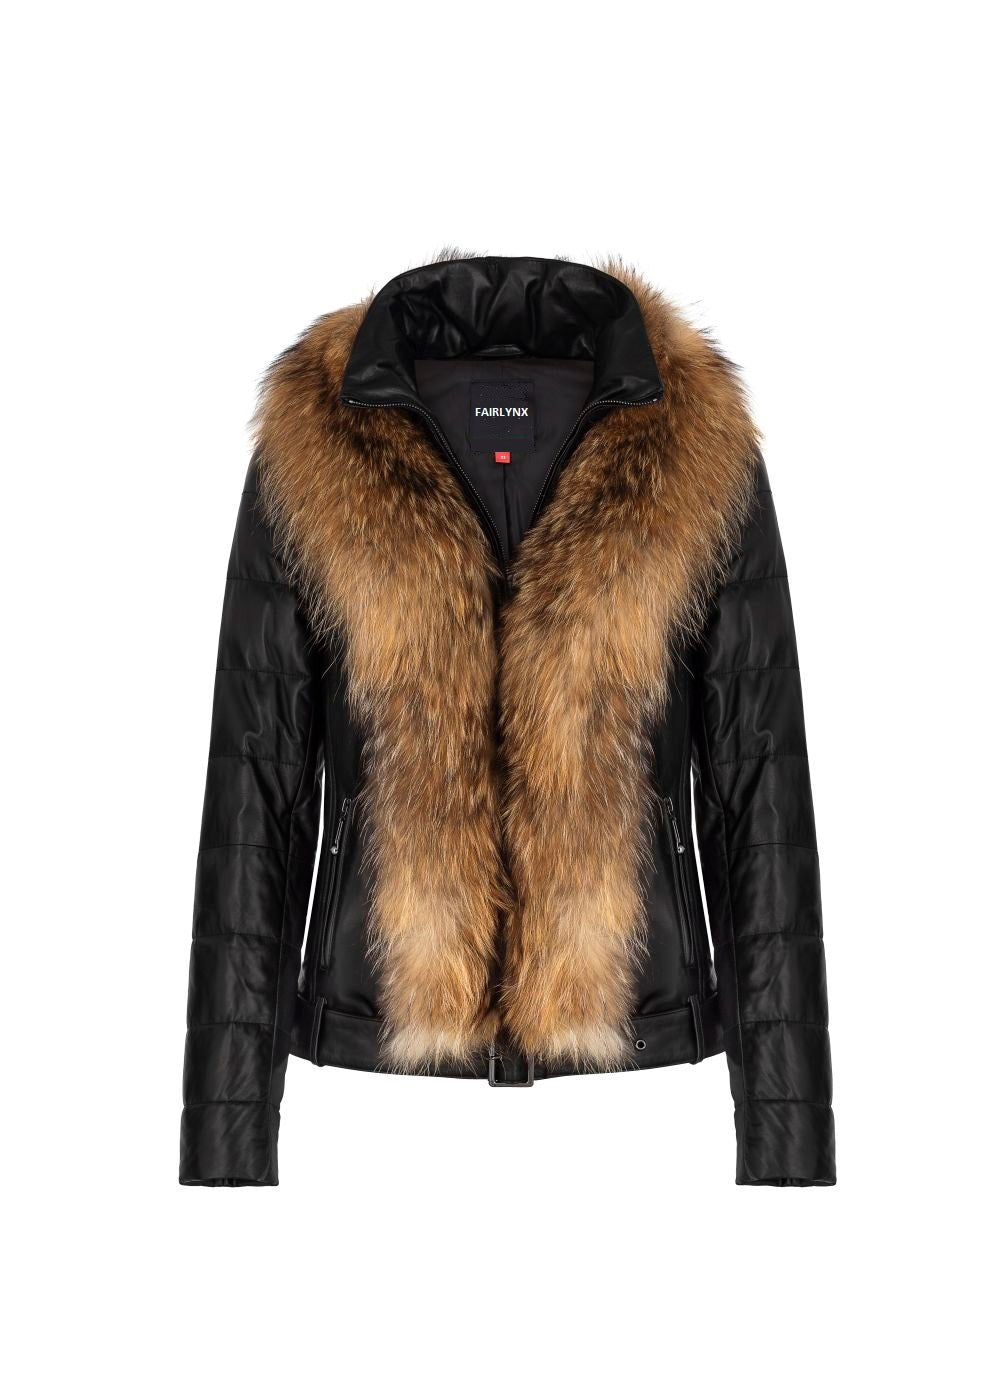 First Way Women's Fur Leather Jacket